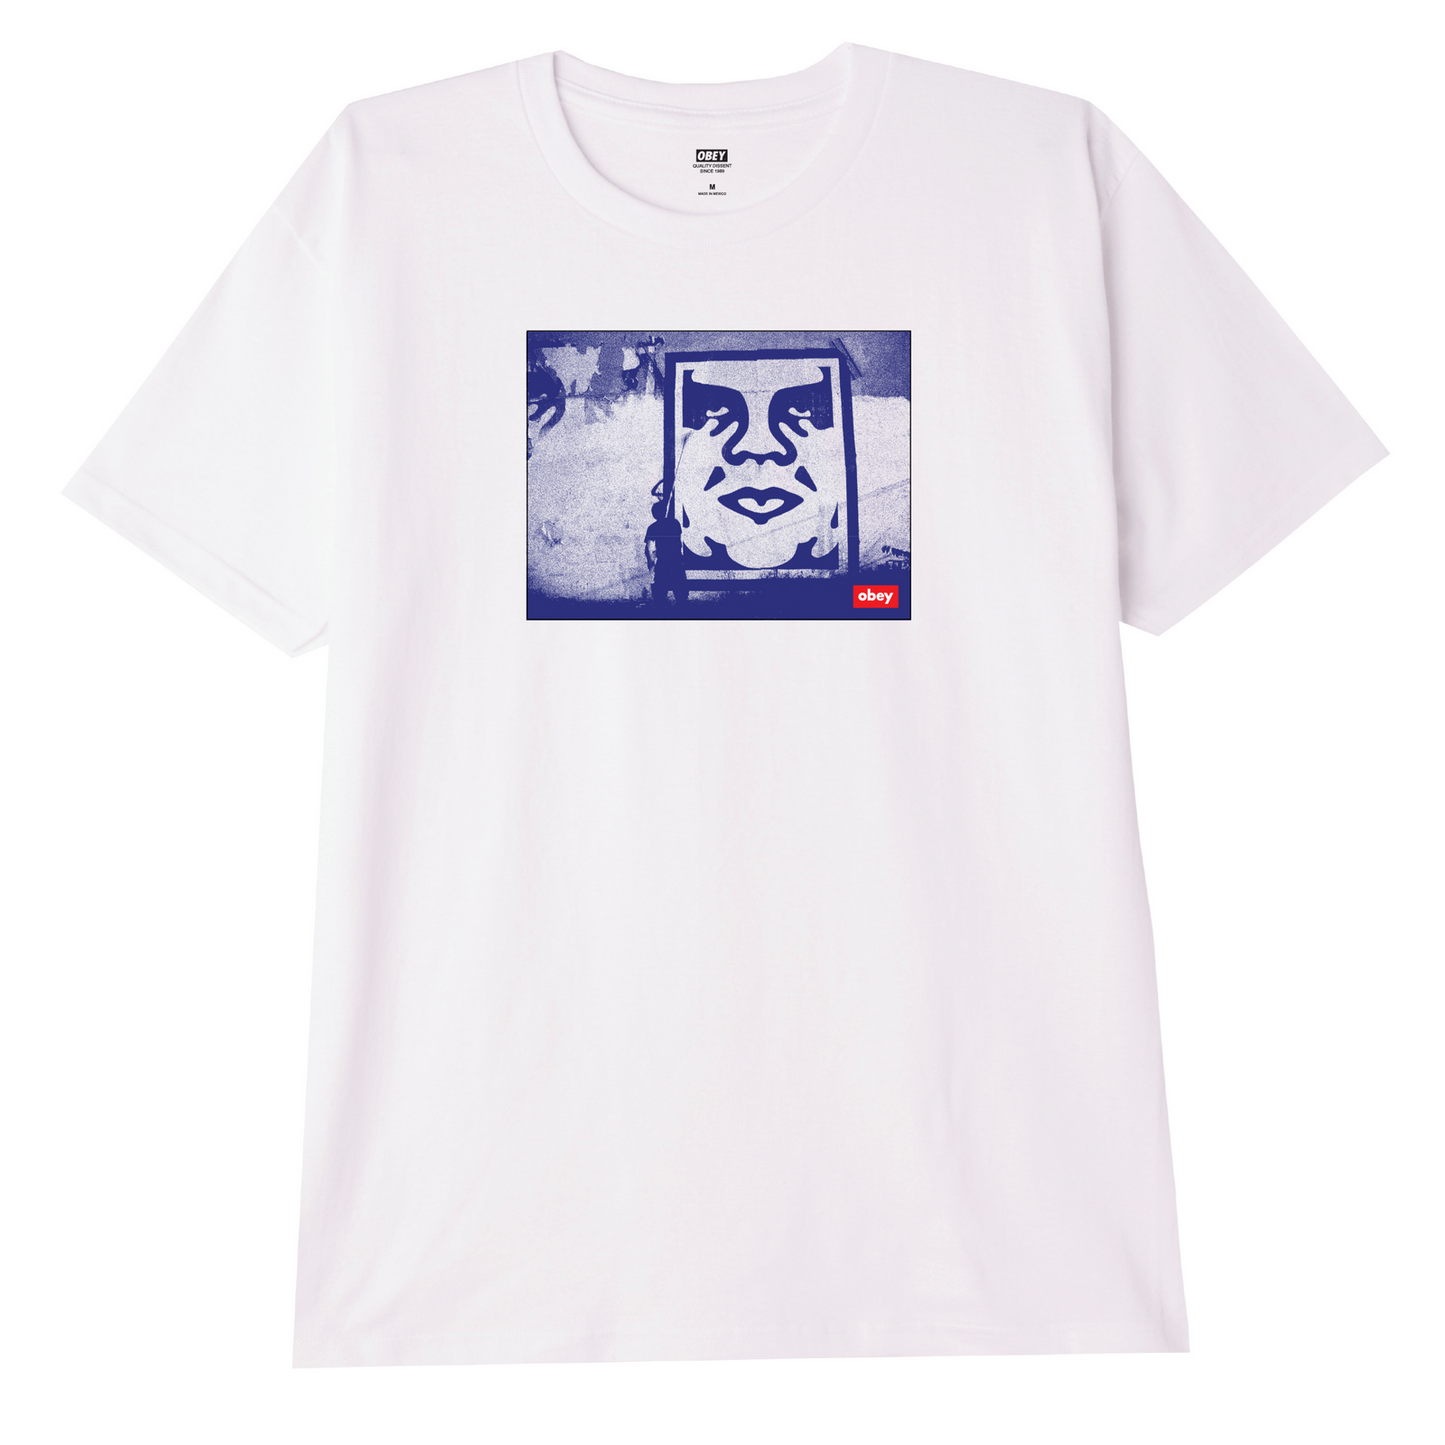 Obey New York photo classic tee